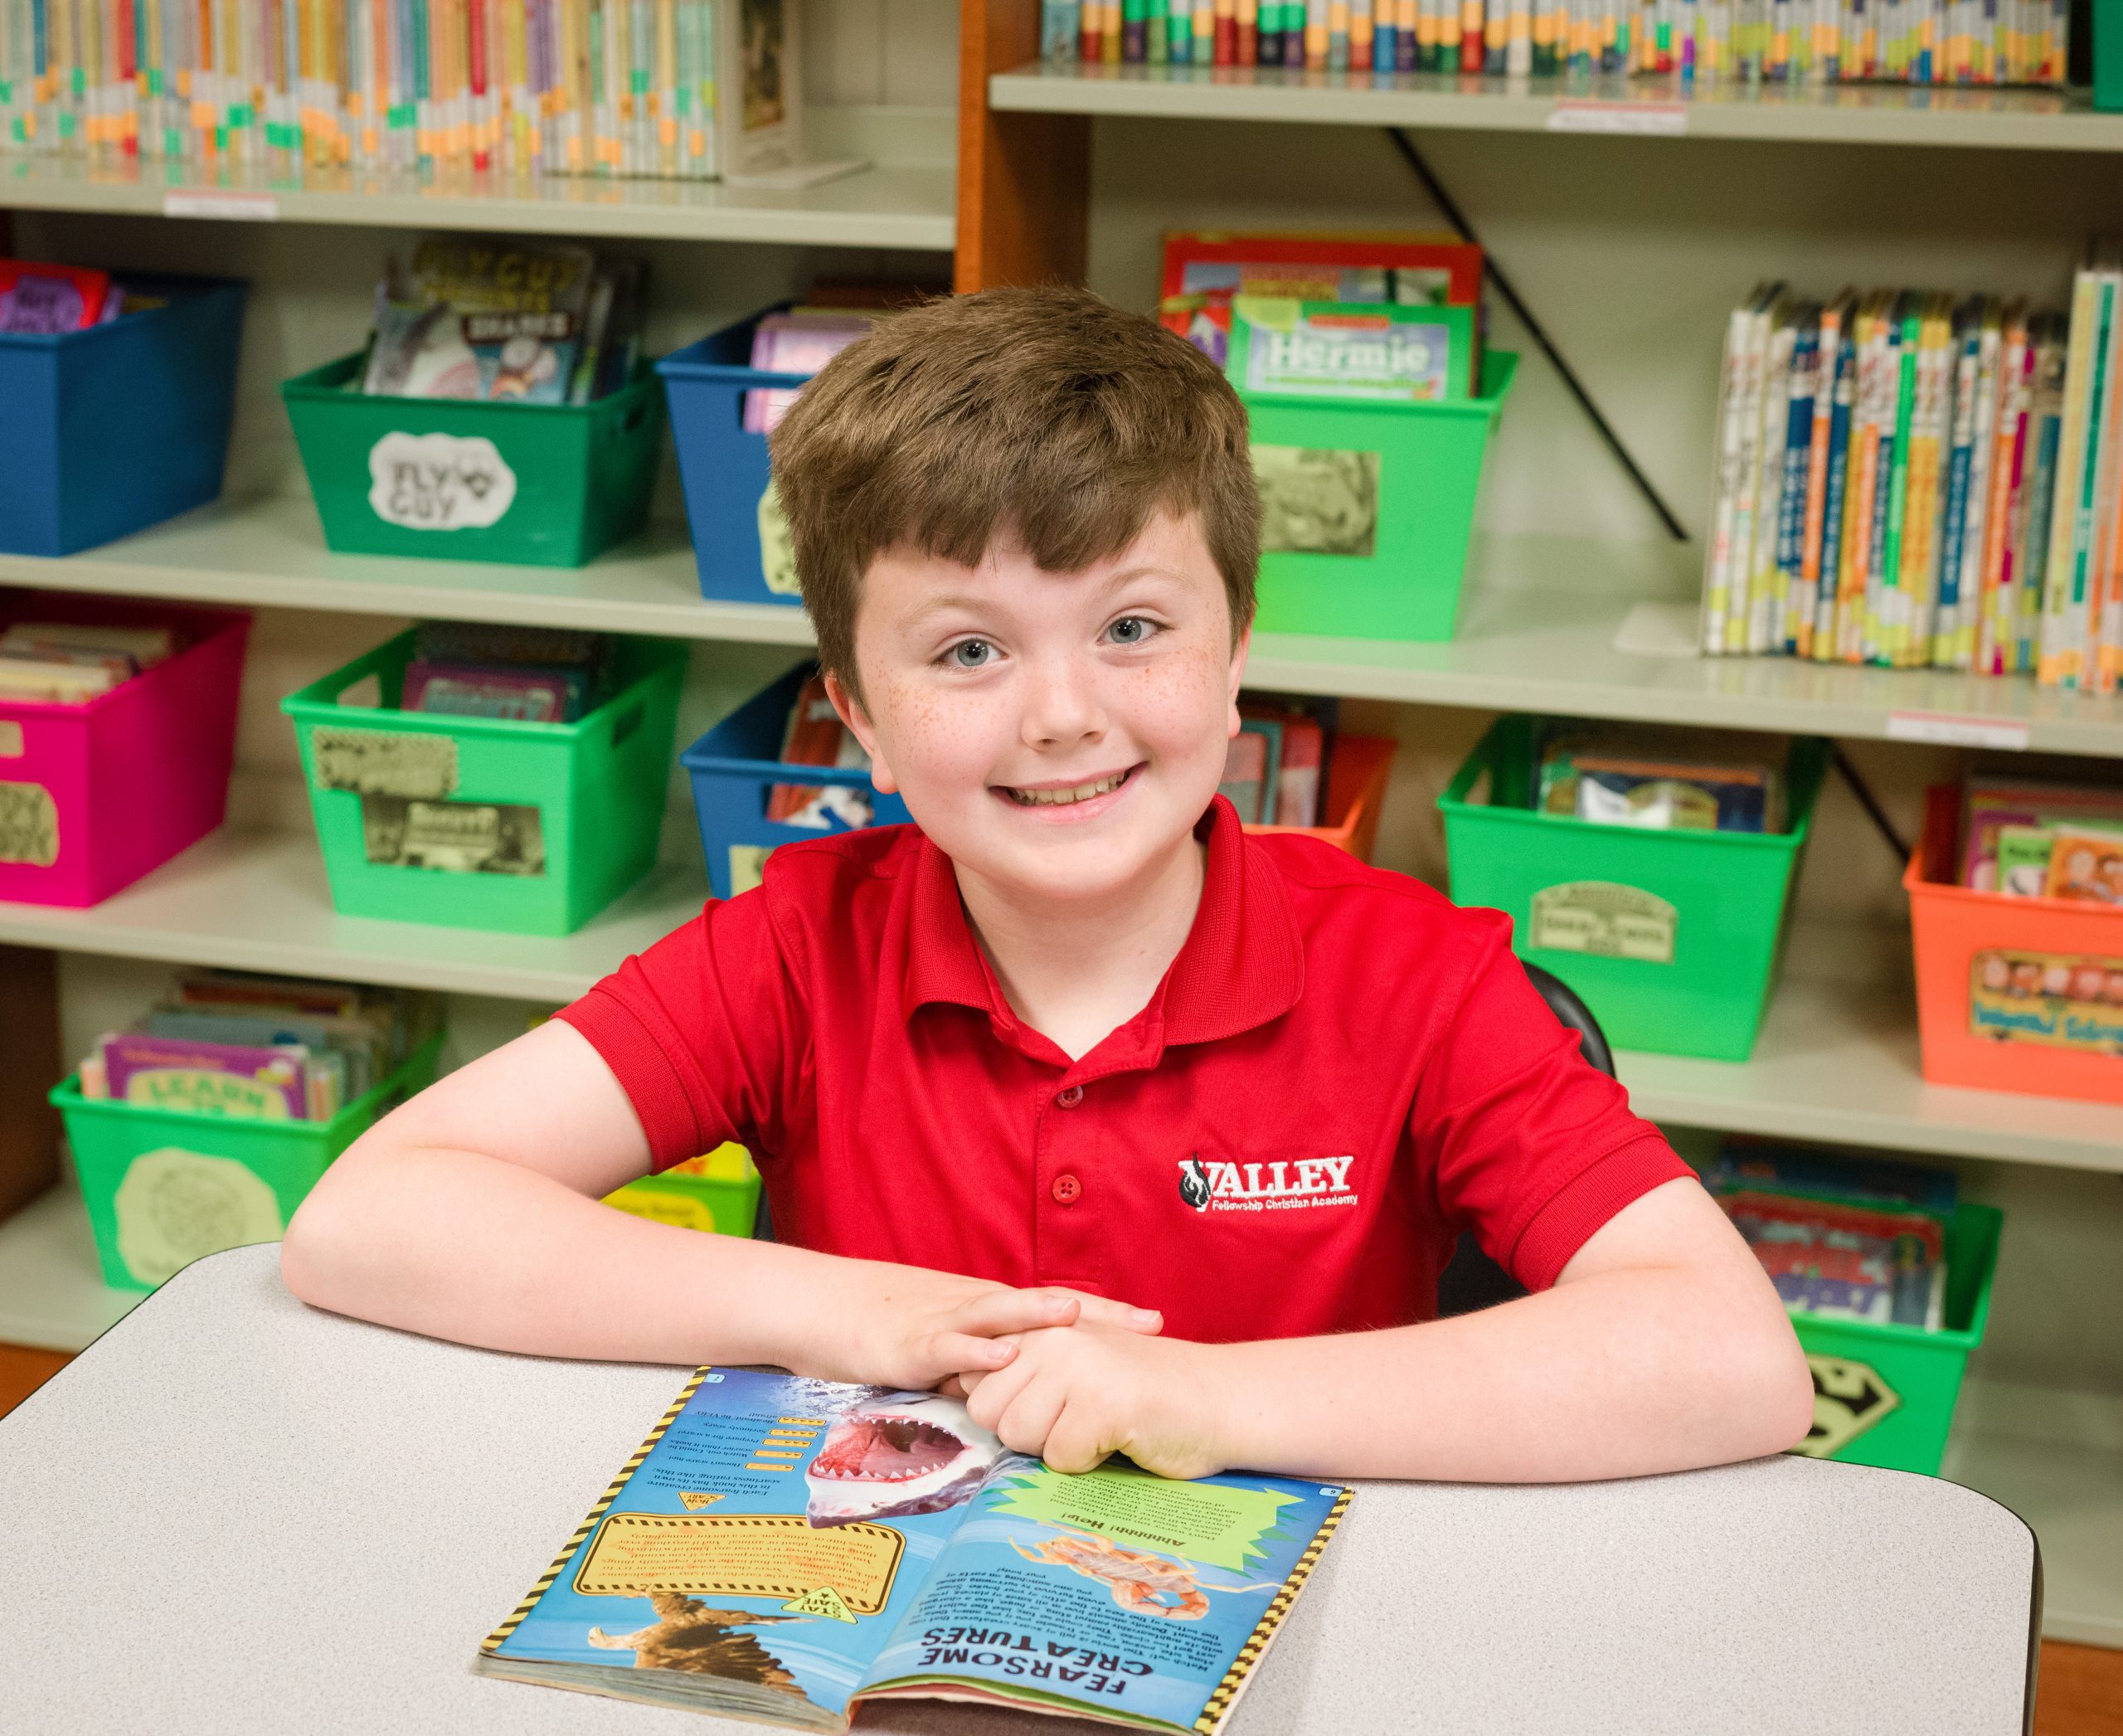 Little boy in a red VFCA T-shirt smiling while reading a book